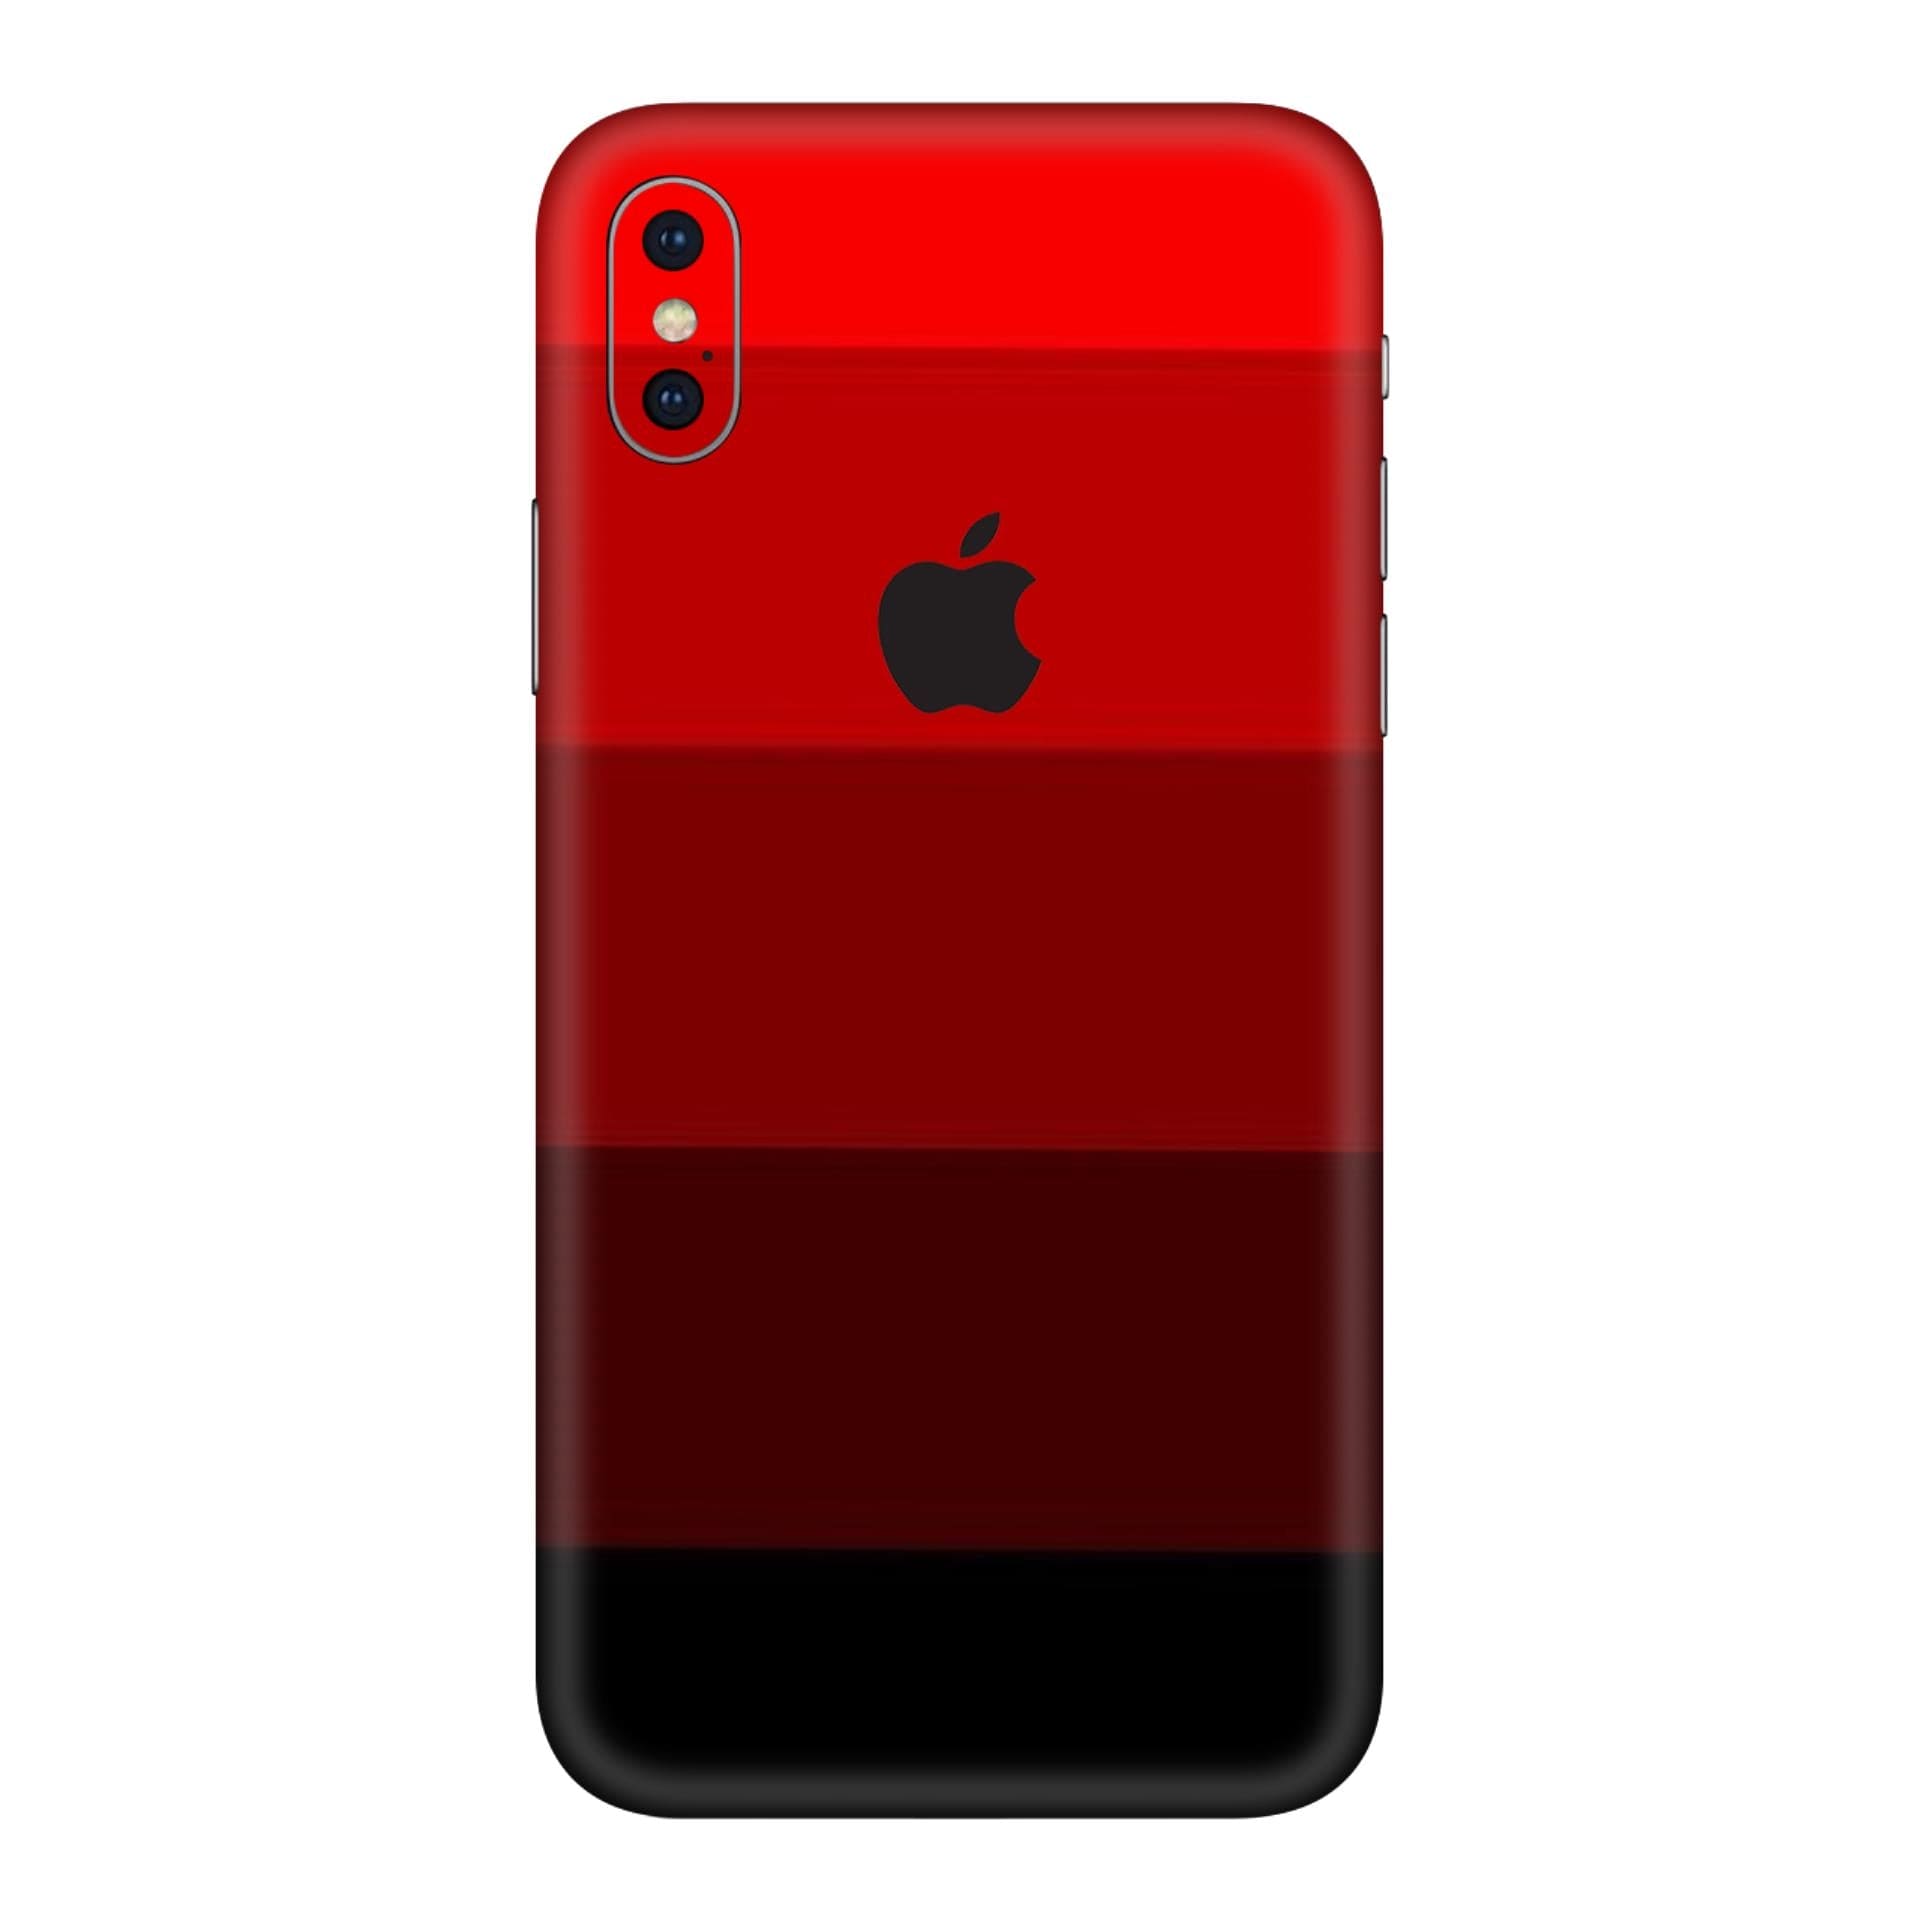 iphone XS Palette Red skins